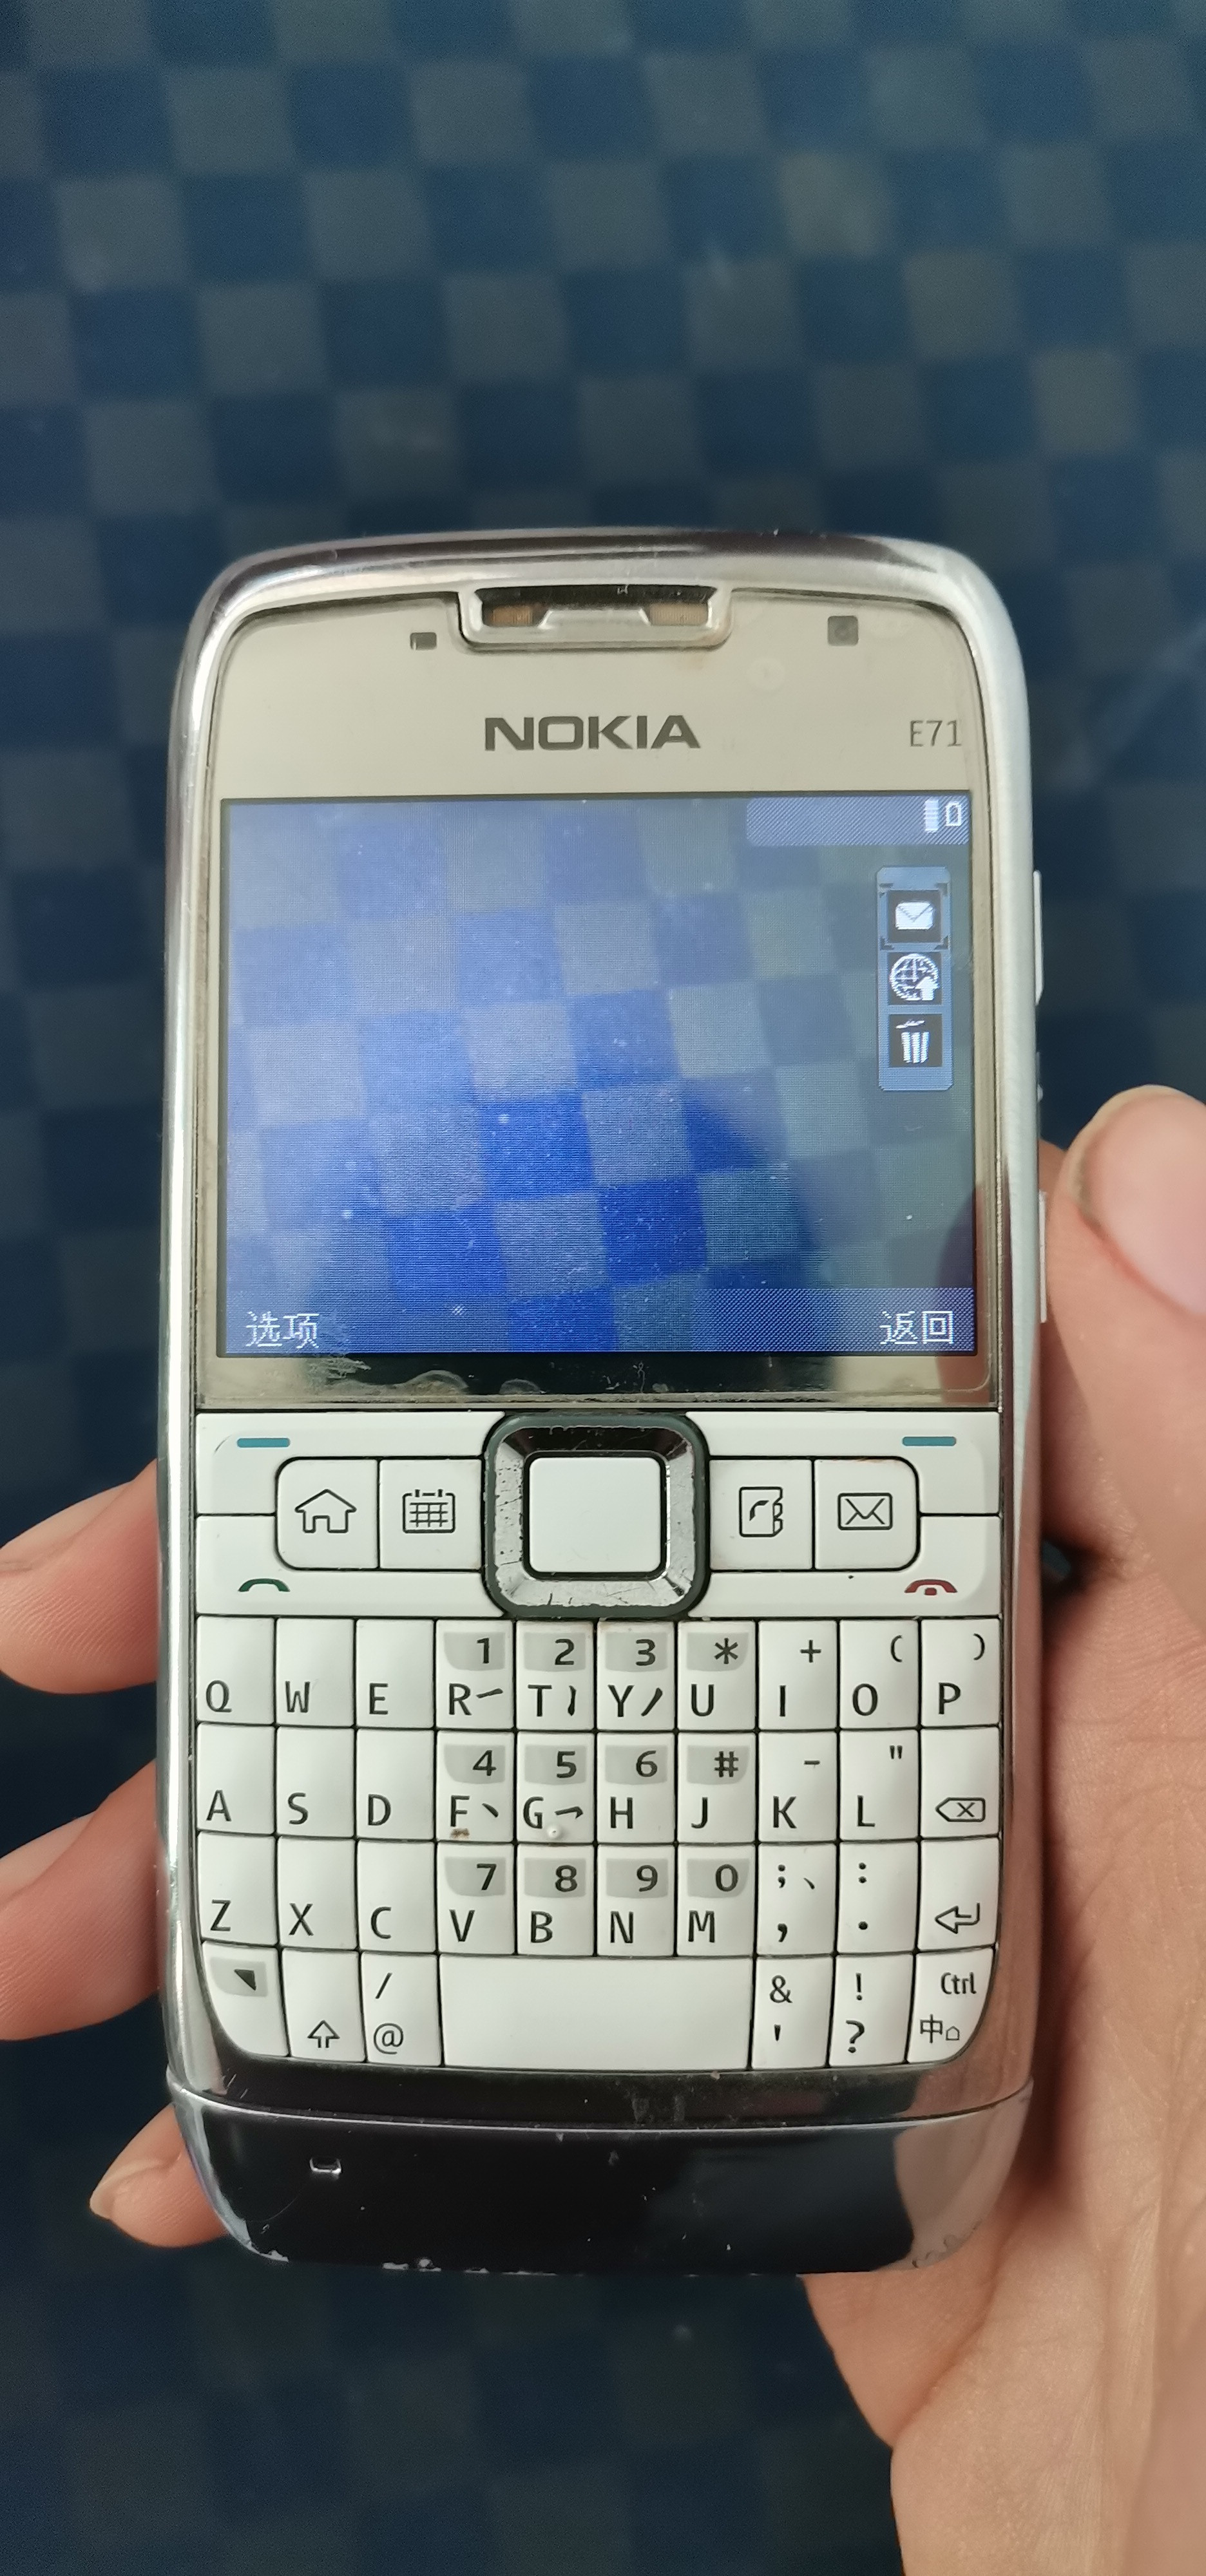 Nokia 6210 Navigator and N82 Black High Quality Pics and Comparison